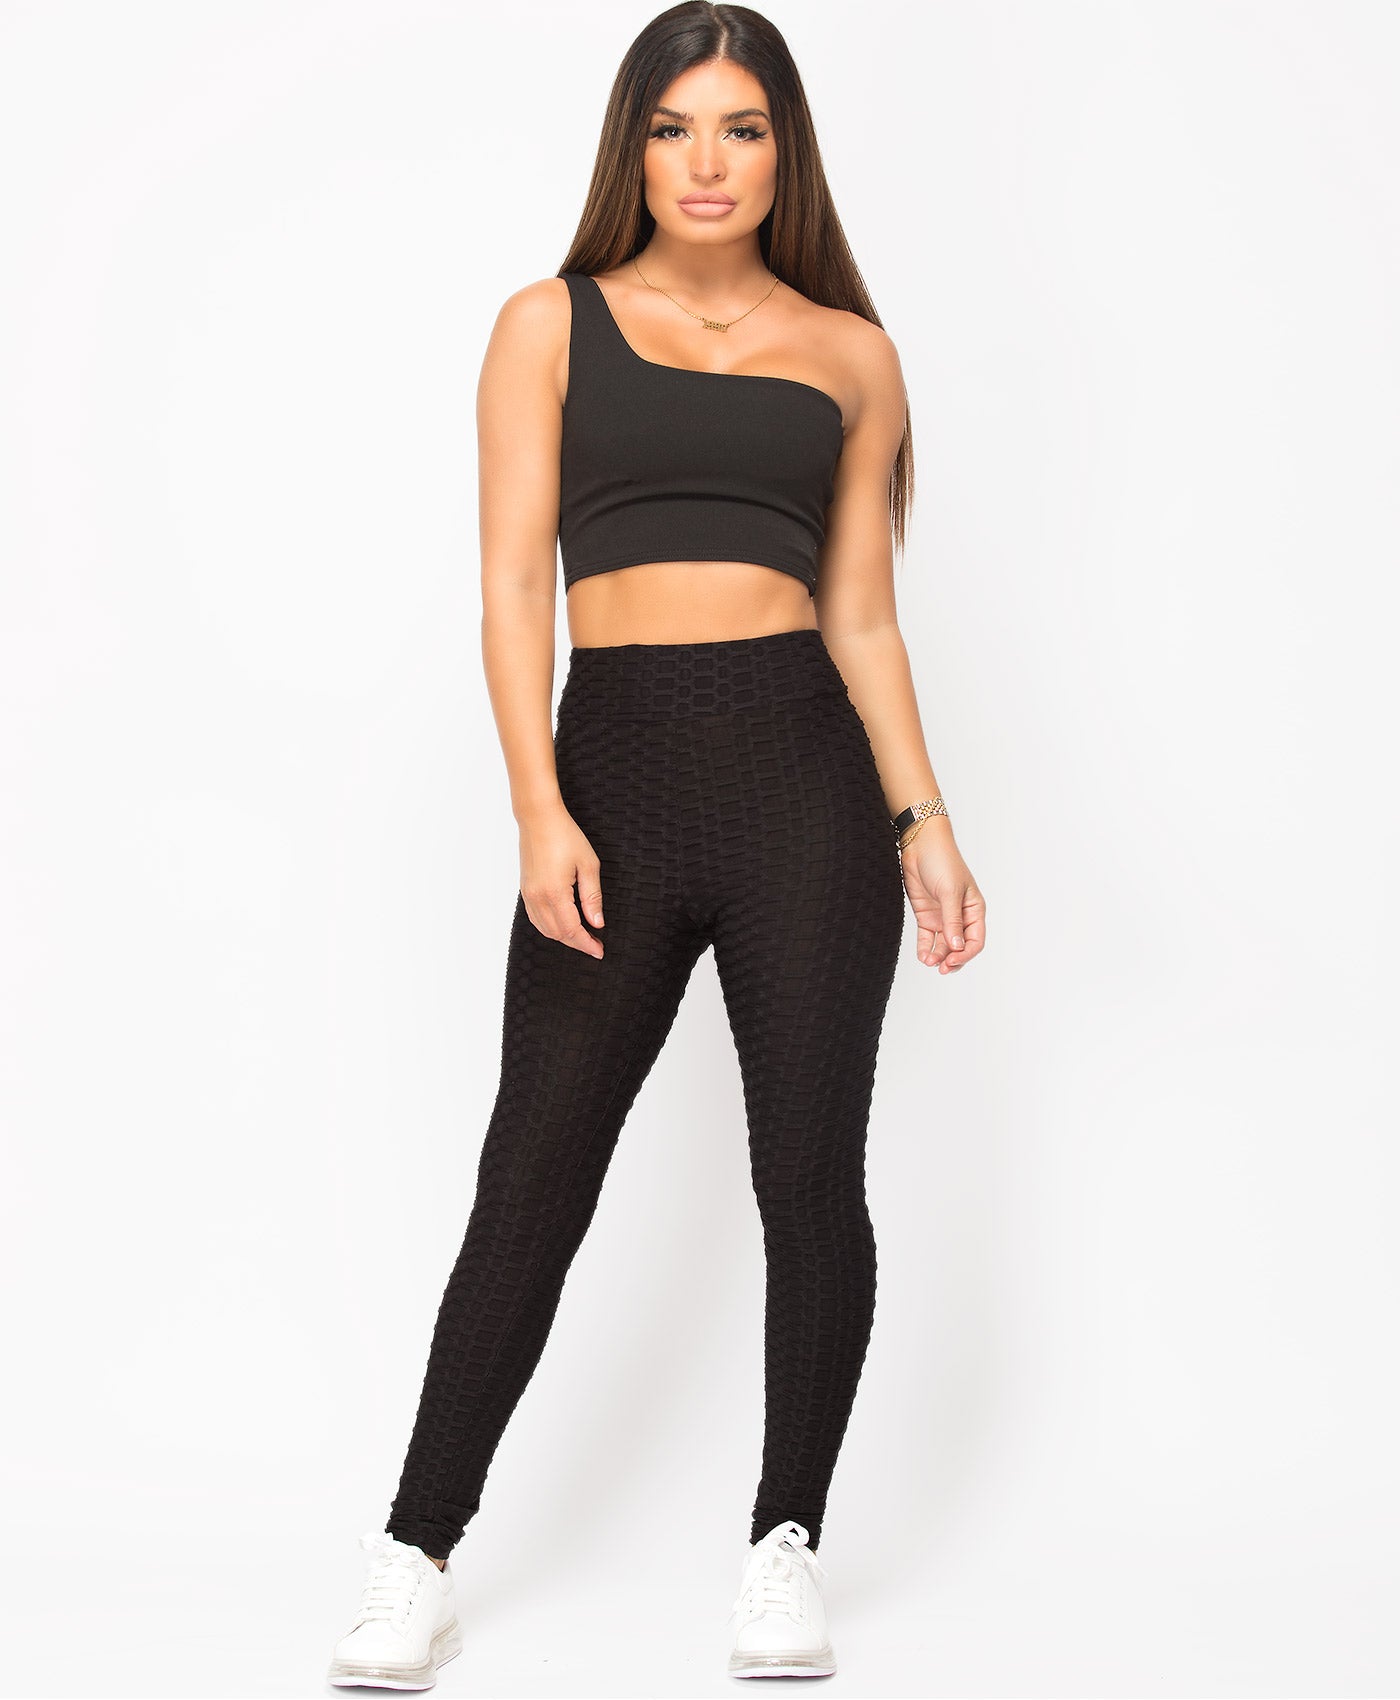  Leggings for Women Wide Waistband Honeycomb Textured Leggings  Leggings for Women (Color : Black, Size : Small) : Clothing, Shoes & Jewelry